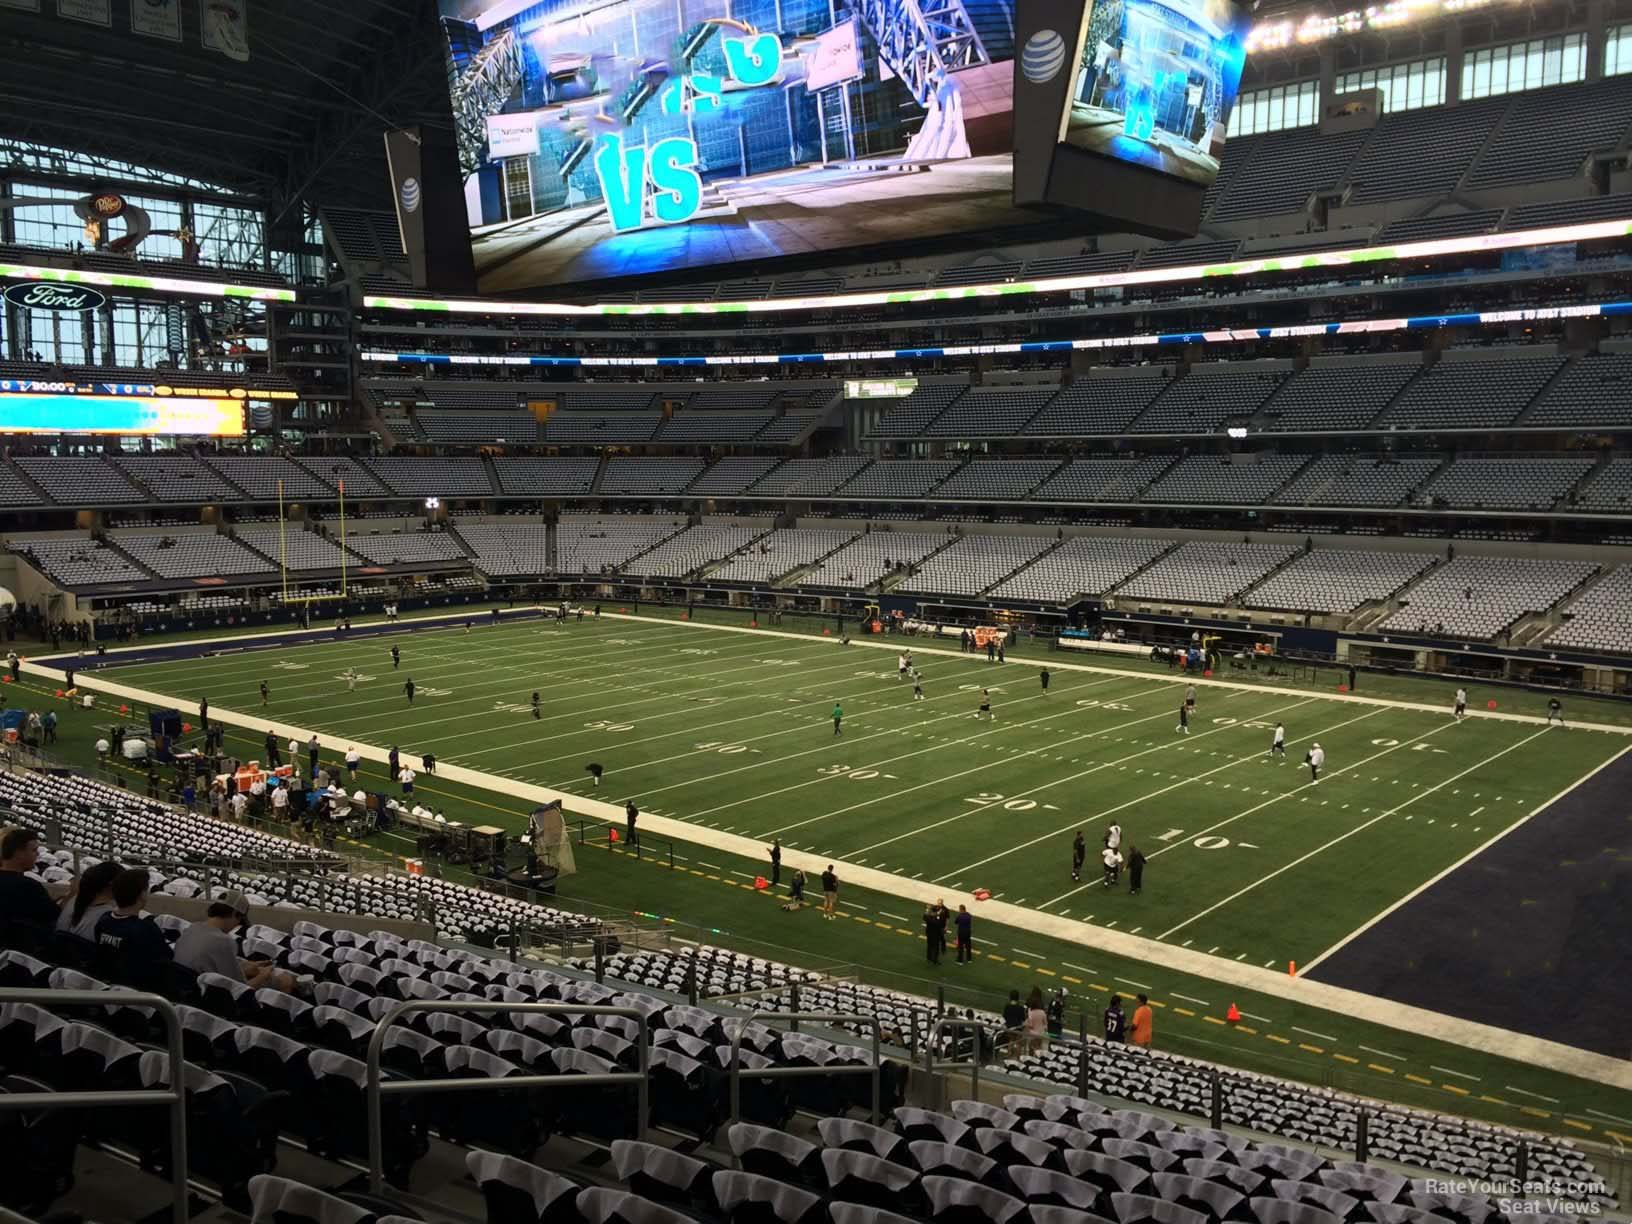 section 228, row 13 seat view  for football - at&t stadium (cowboys stadium)